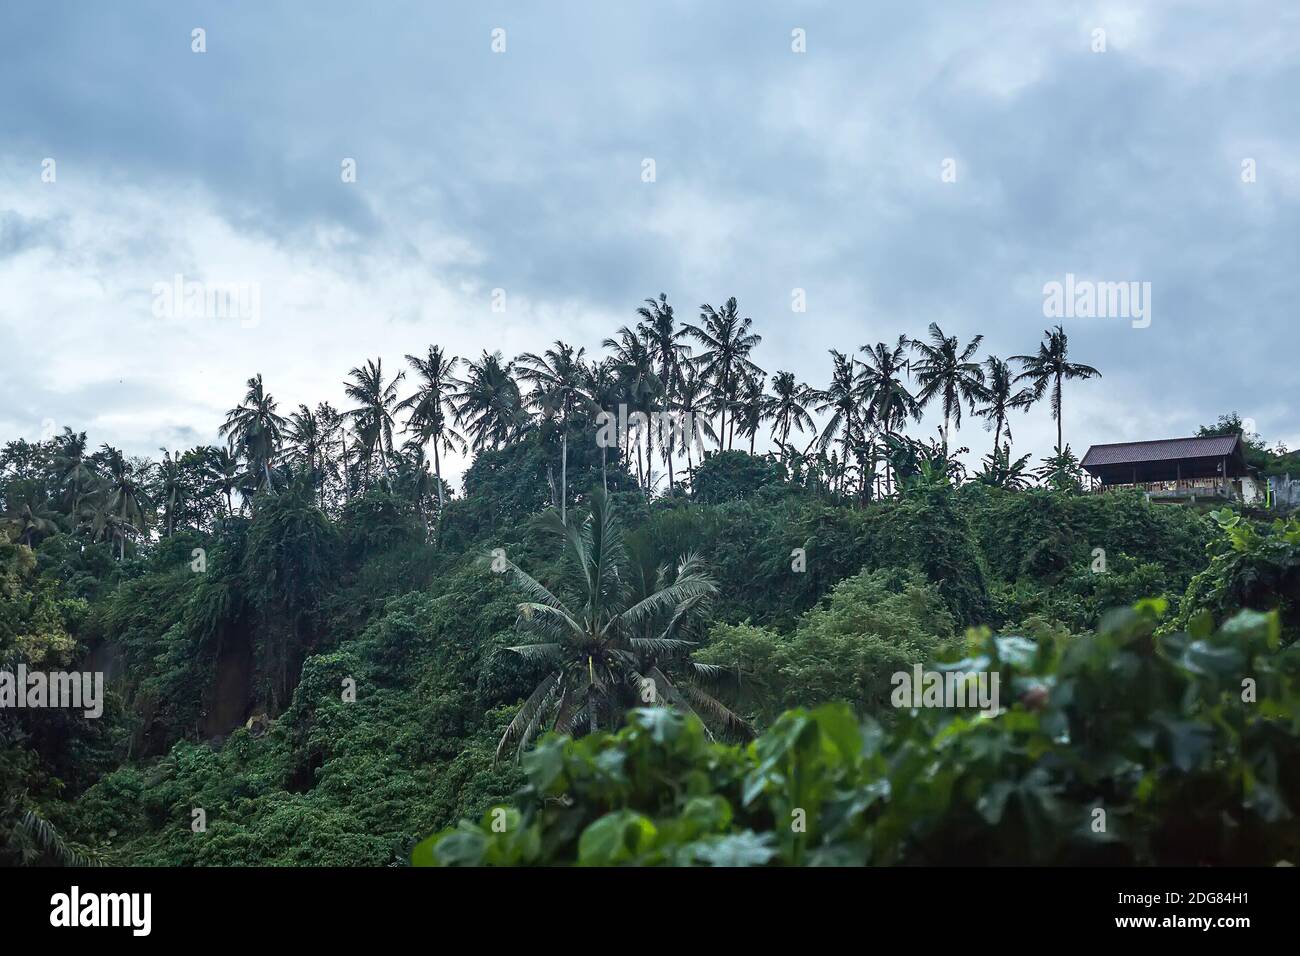 Jungles with small house Stock Photo